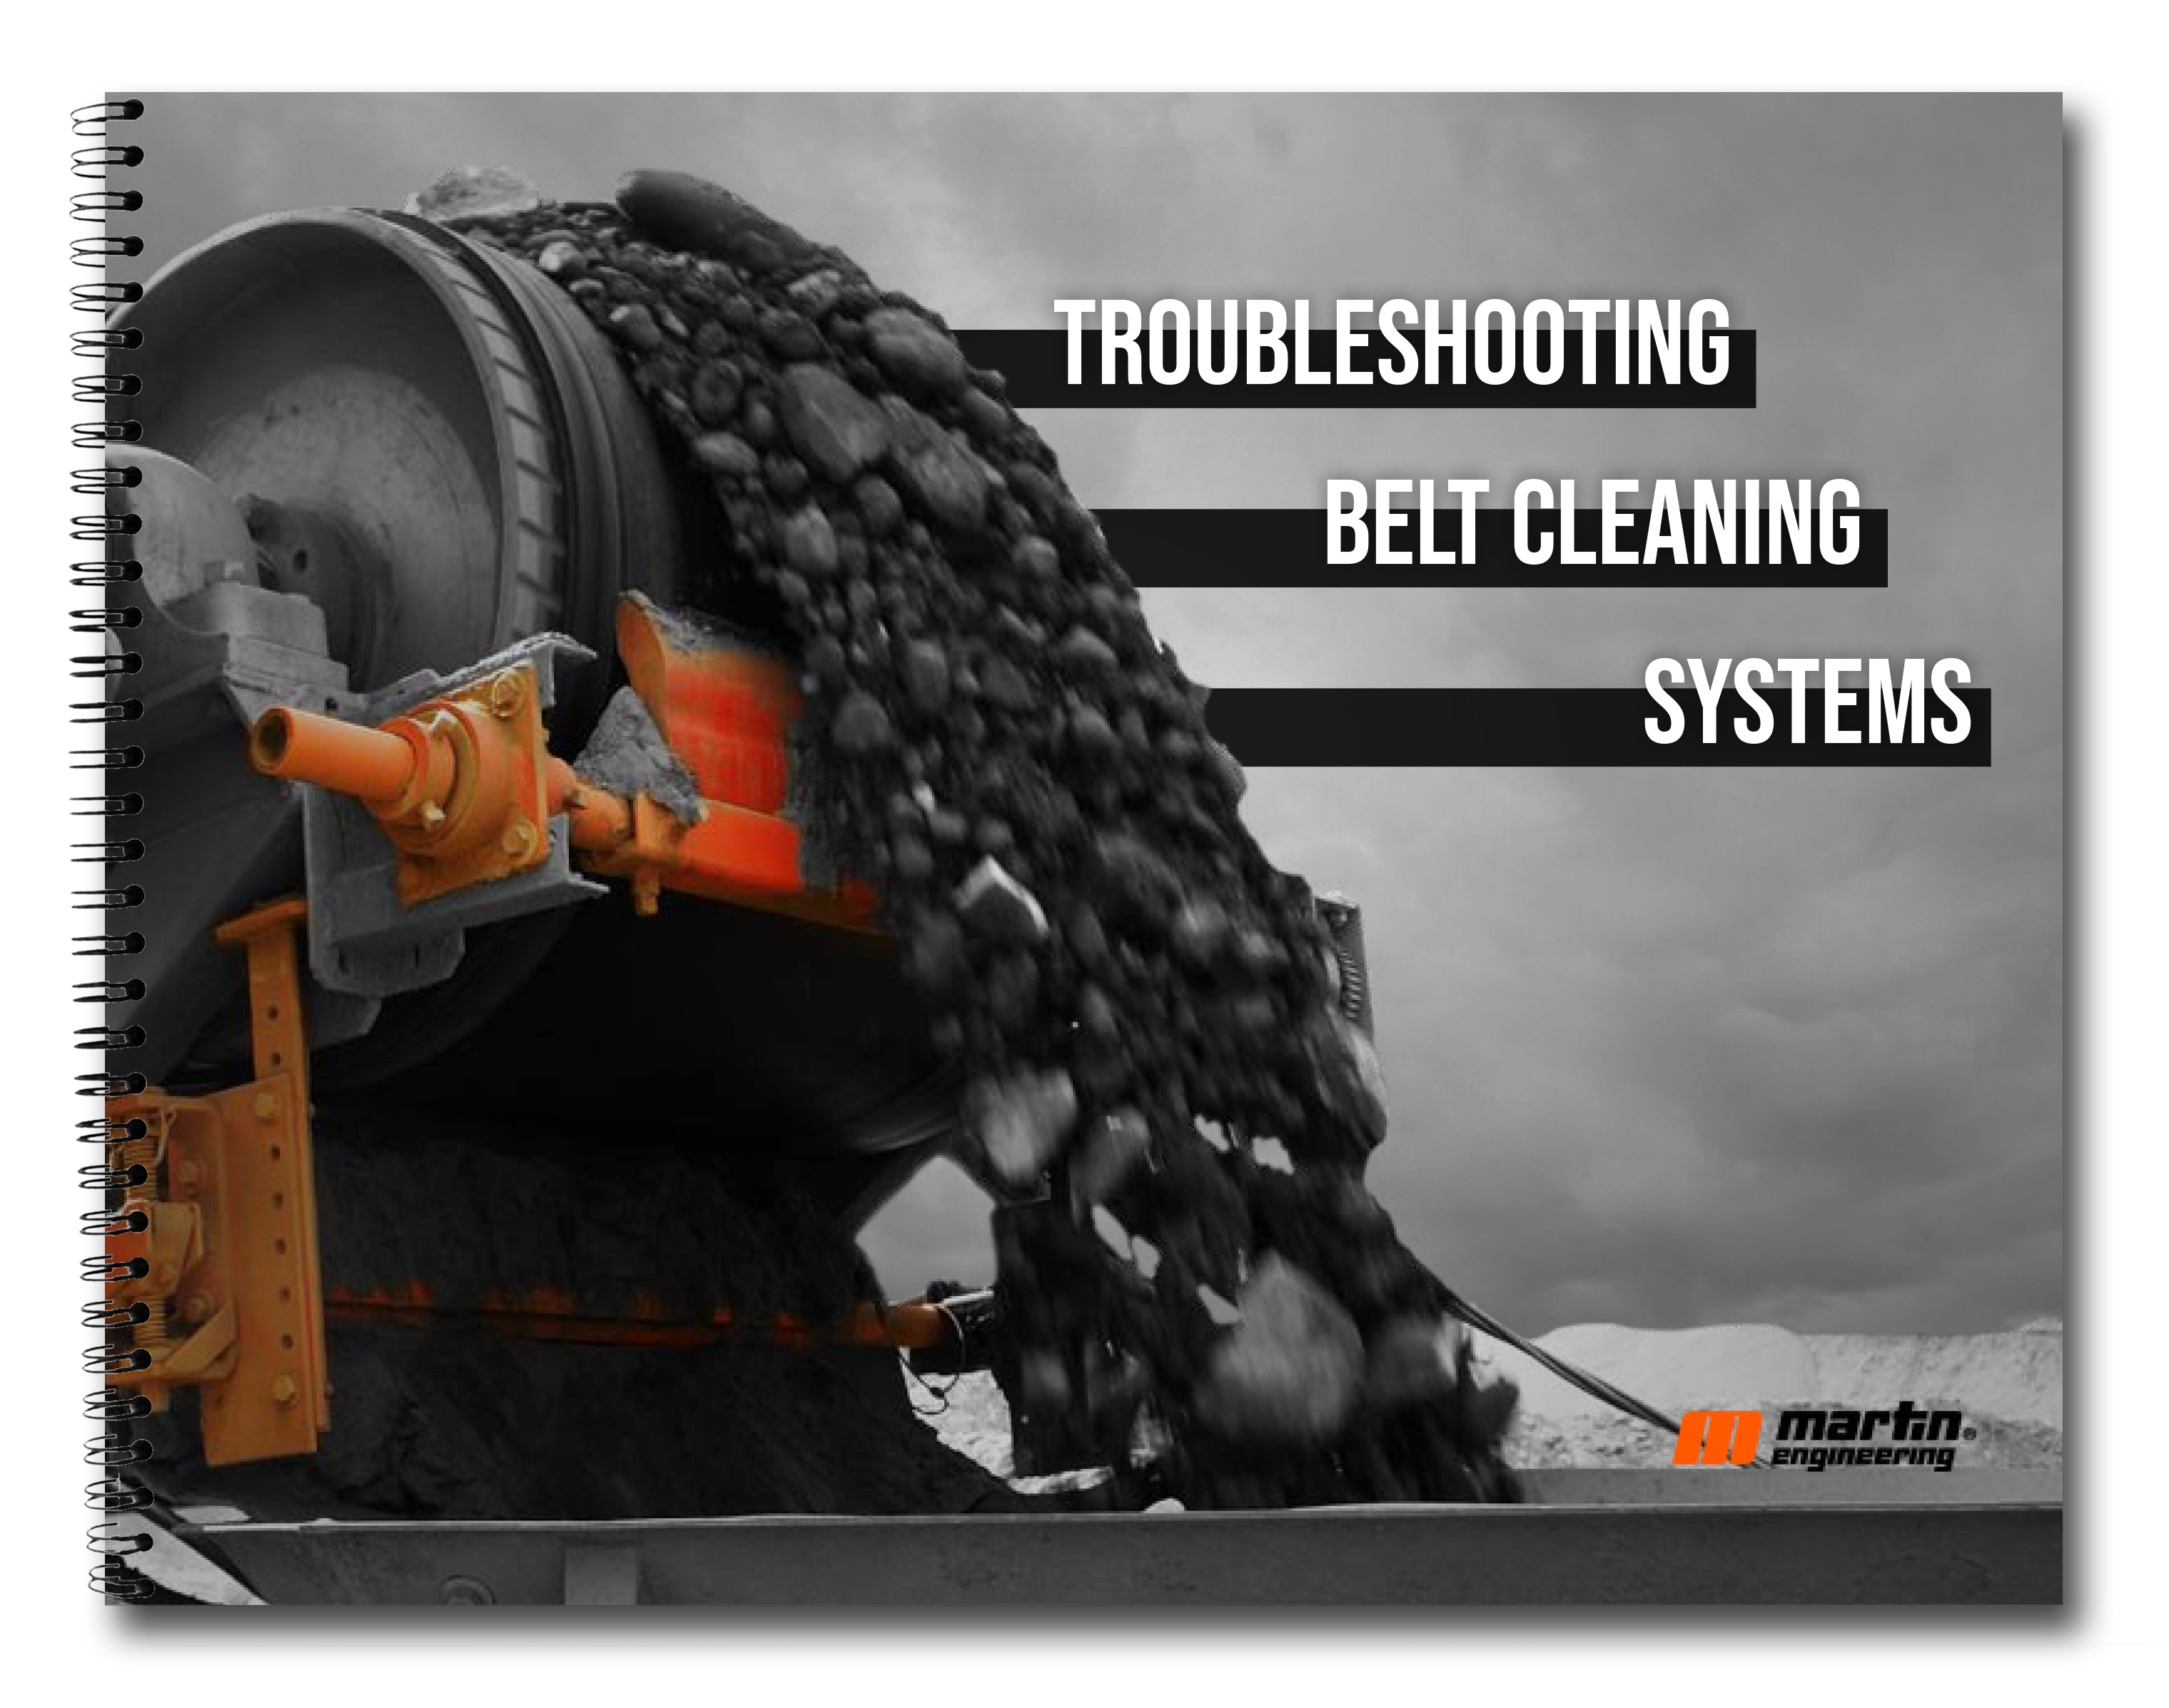 Troubleshooting Belt Cleaning Systems